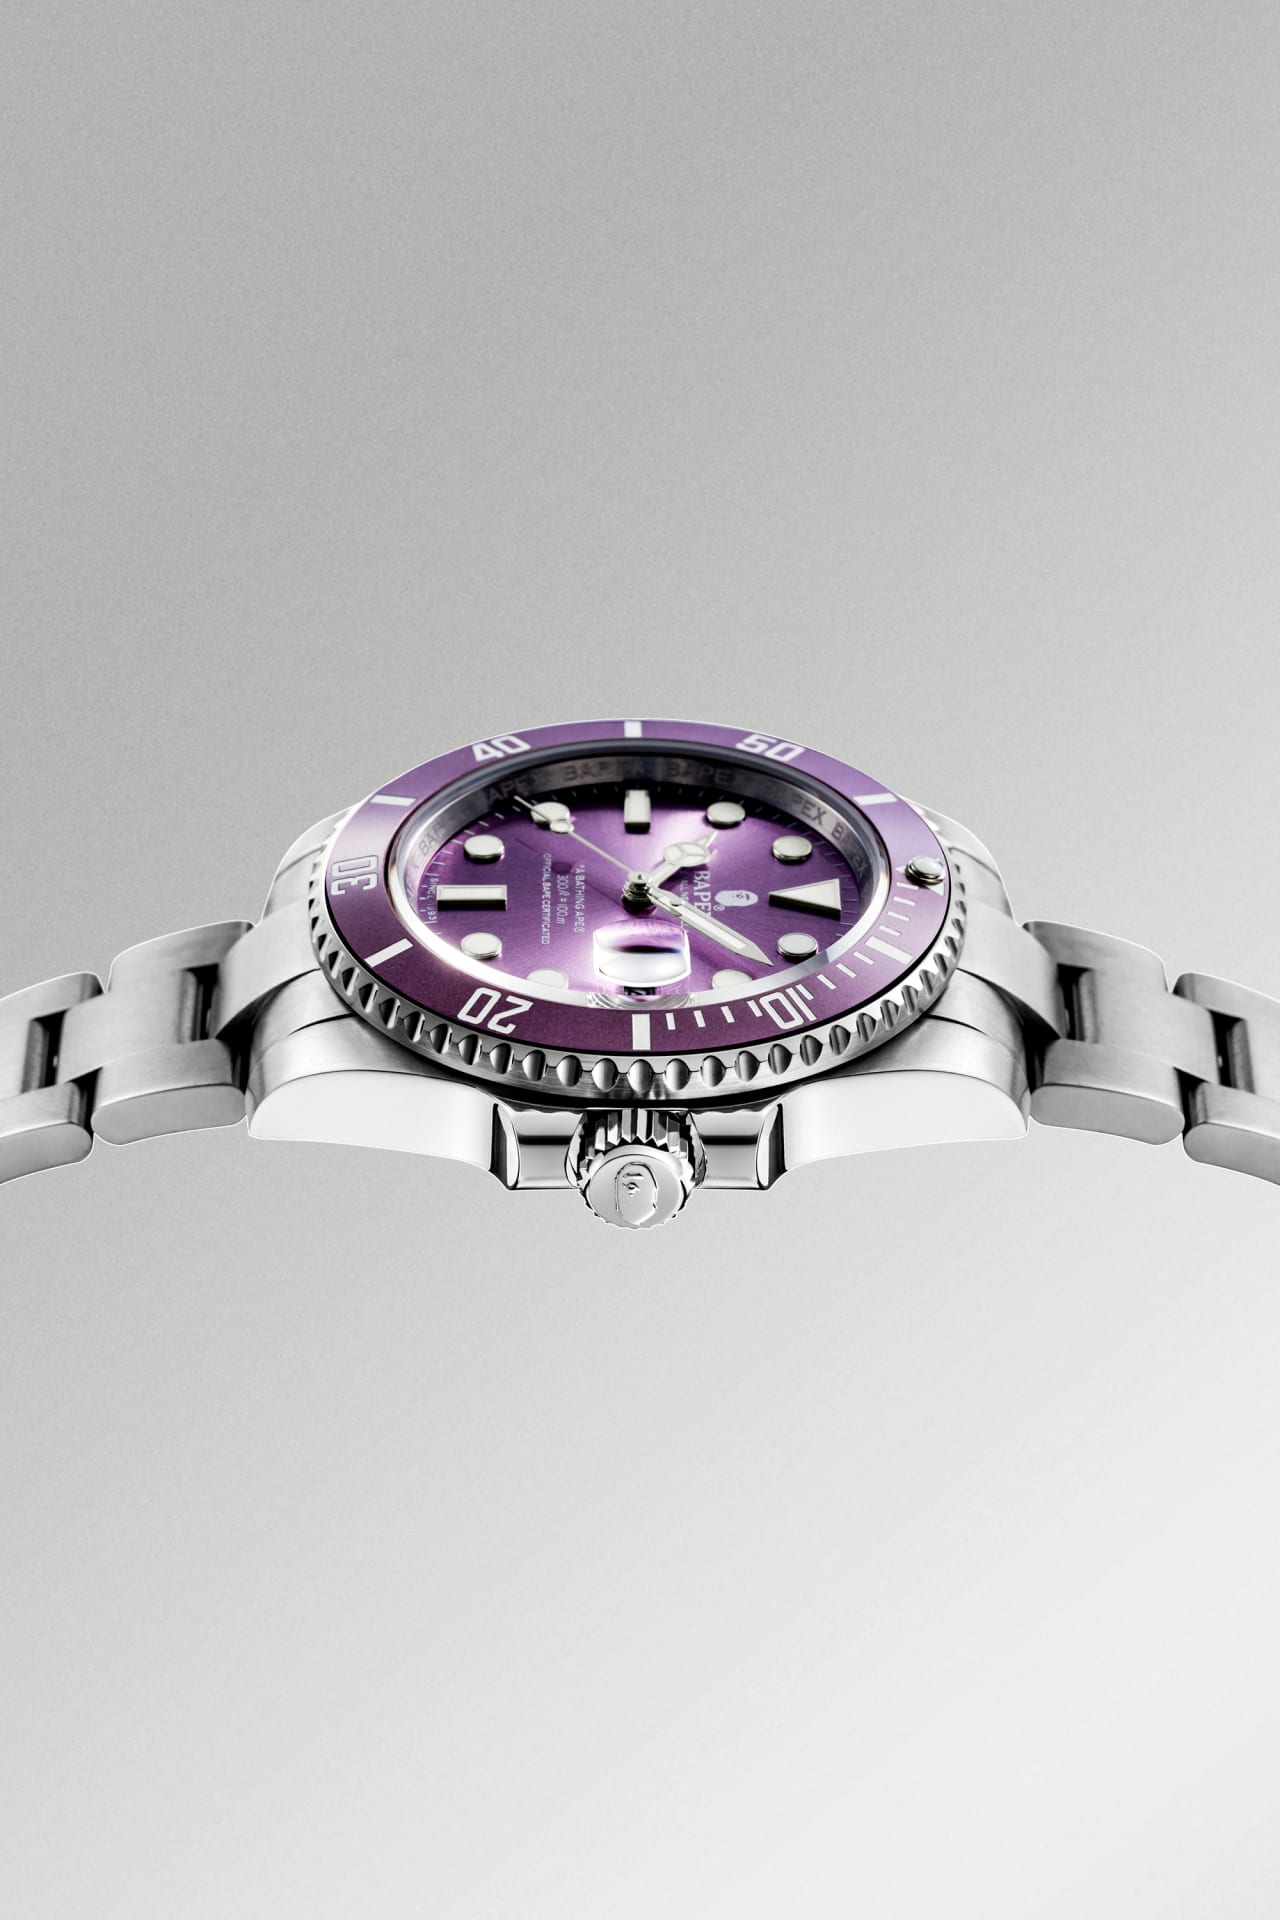 BAPE Unveils New BAPEX Type 1 Watch Collection Available This Week 